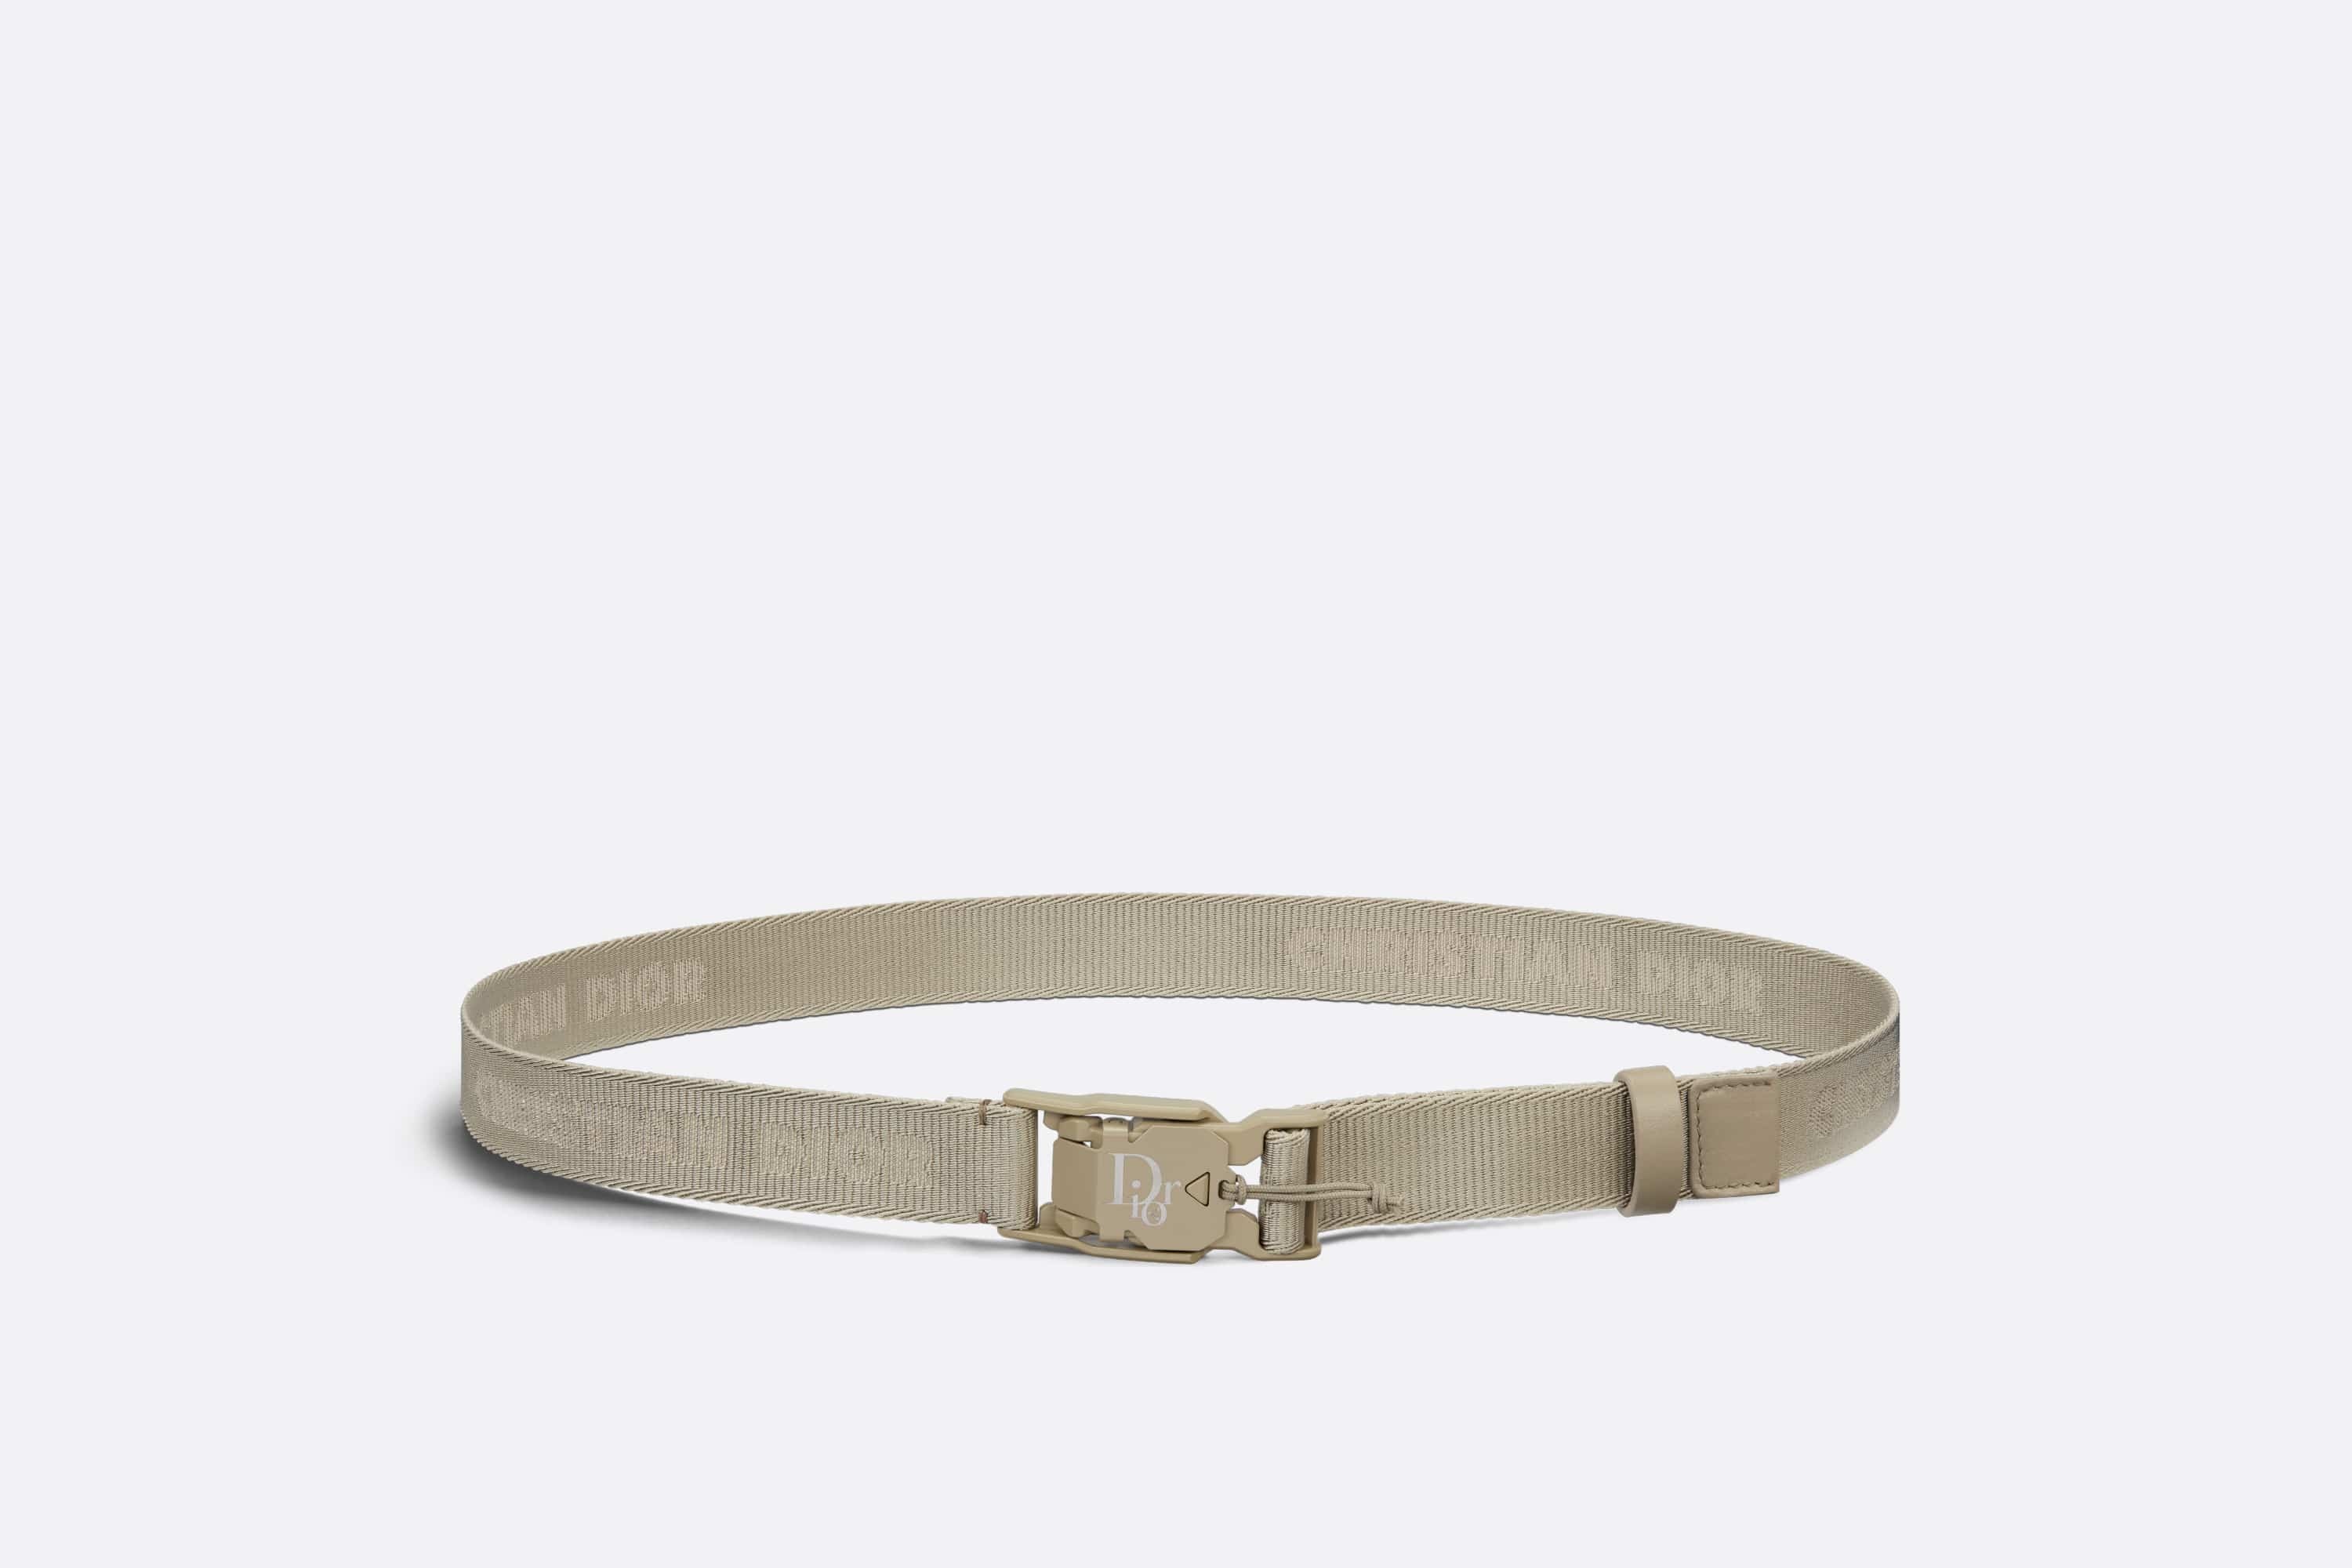 DIOR by MYSTERY RANCH Tactical Belt - 1